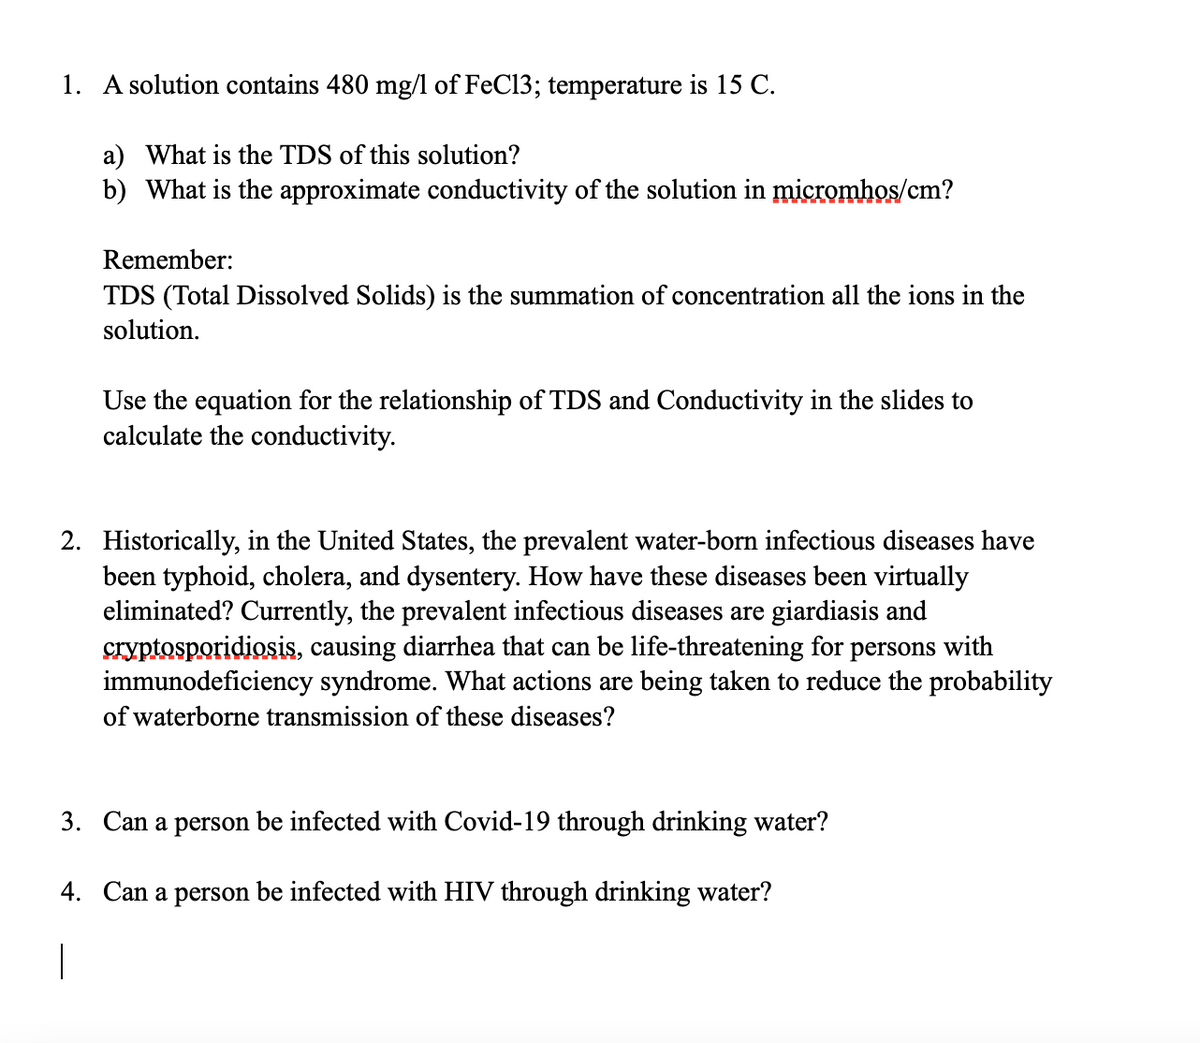 1. A solution contains 480 mg/l of FeC13; temperature is 15 C.
a) What is the TDS of this solution?
b) What is the approximate conductivity of the solution in micromhos/cm?
Remember:
TDS (Total Dissolved Solids) is the summation of concentration all the ions in the
solution.
Use the equation for the relationship of TDS and Conductivity in the slides to
calculate the conductivity.
2. Historically, in the United States, the prevalent water-born infectious diseases have
been typhoid, cholera, and dysentery. How have these diseases been virtually
eliminated? Currently, the prevalent infectious diseases are giardiasis and
cryptosporidiosis, causing diarrhea that can be life-threatening for persons with
immunodeficiency syndrome. What actions are being taken to reduce the probability
of waterborne transmission of these diseases?
3. Can a person be infected with Covid-19 through drinking water?
4. Can a person be infected with HIV through drinking water?